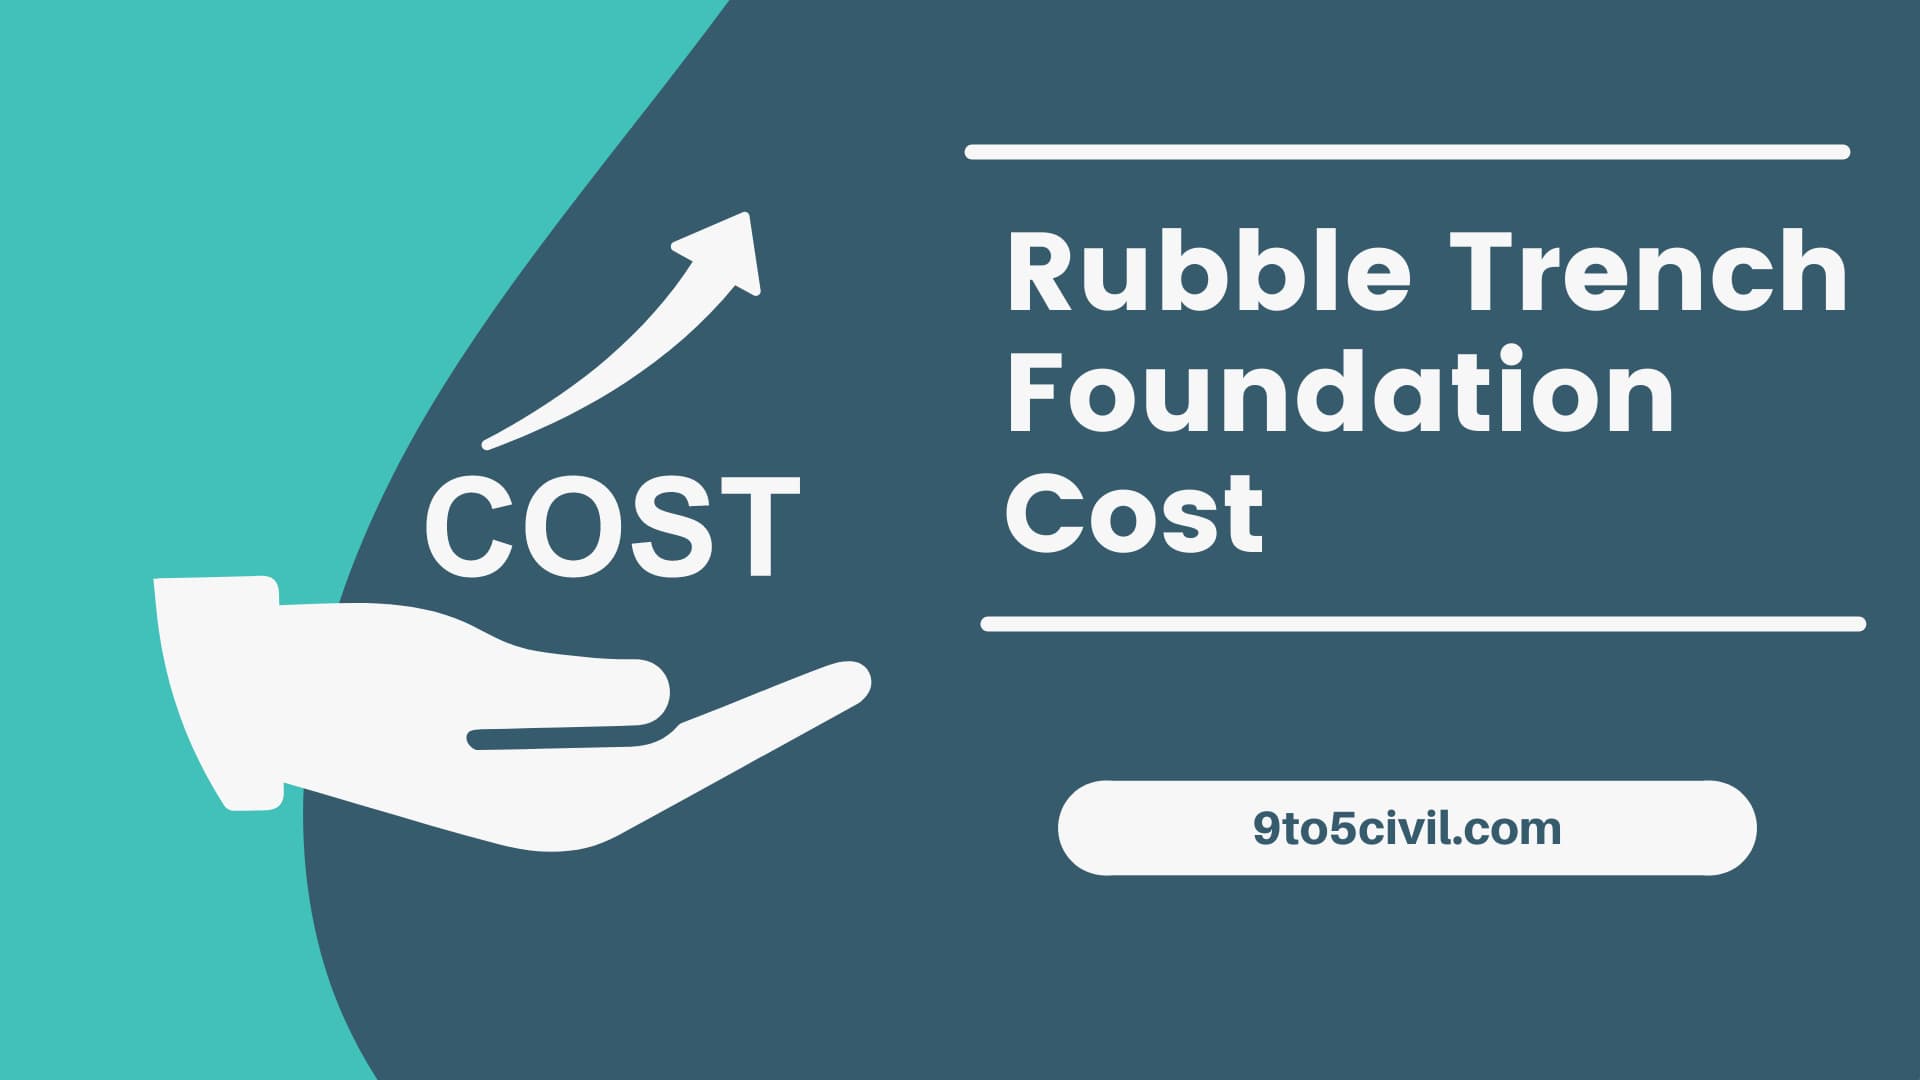 Rubble Trench Foundation Cost